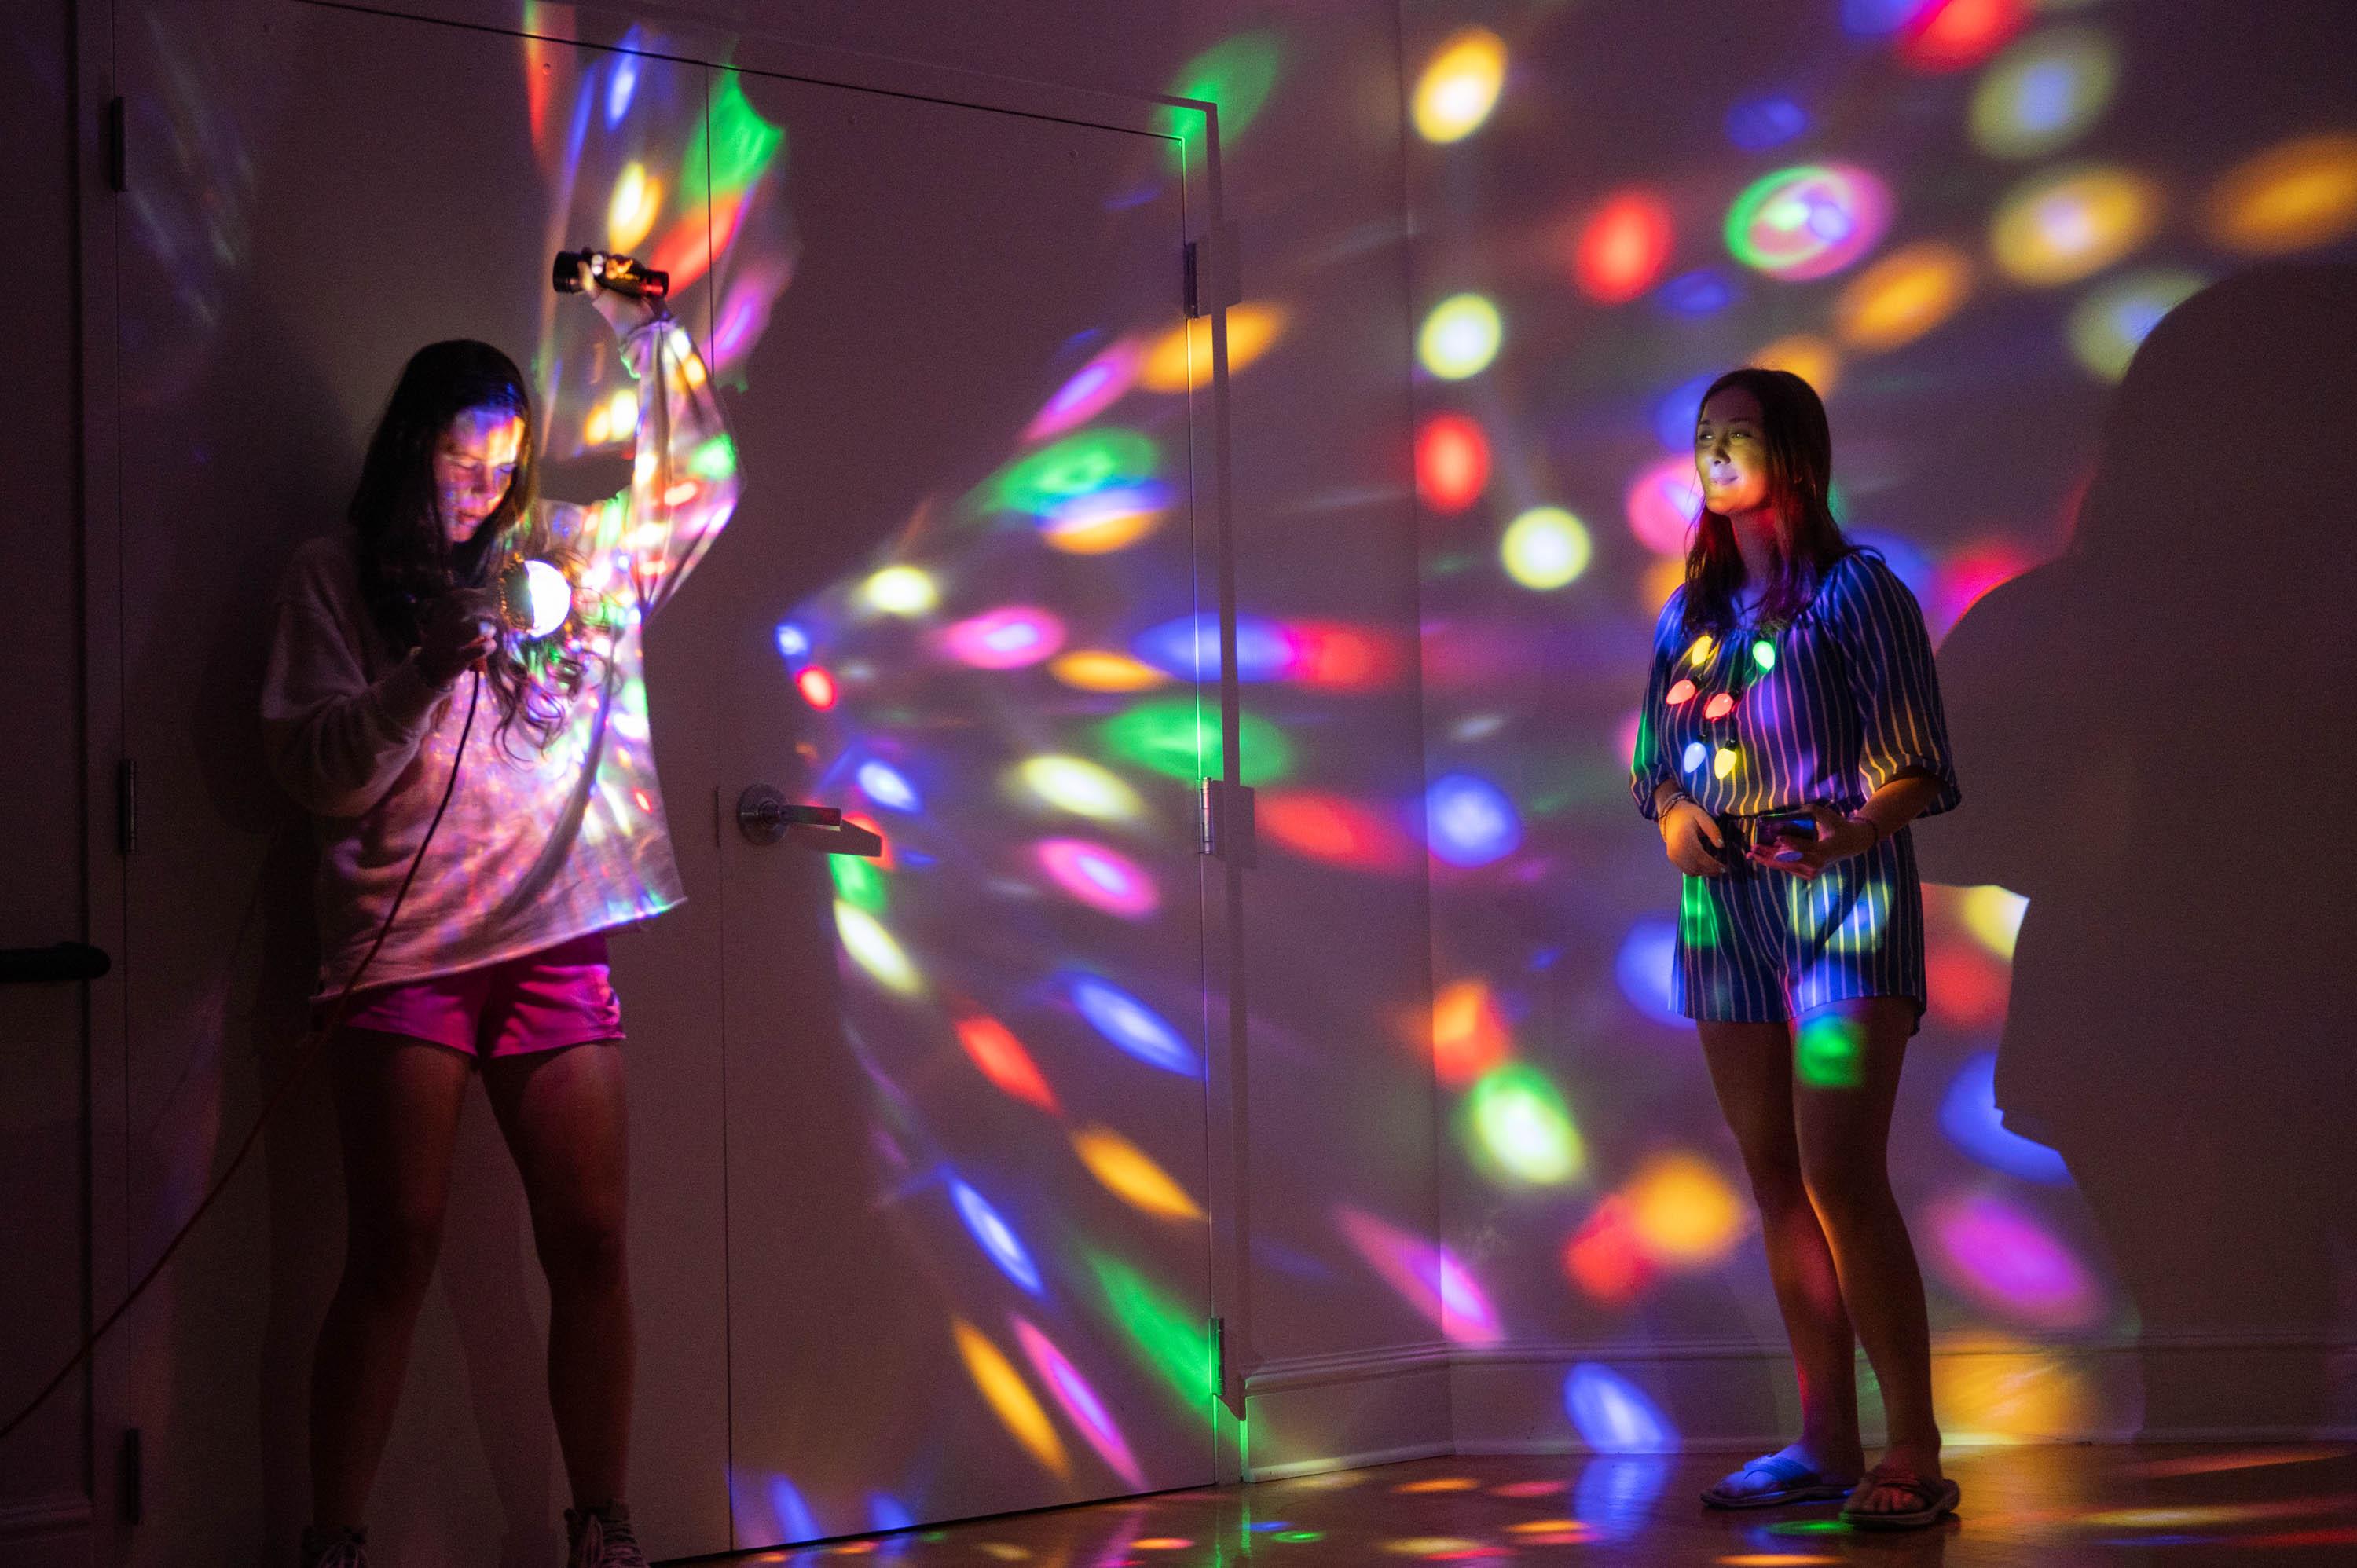 Teens experimenting with colored lights in a photograph